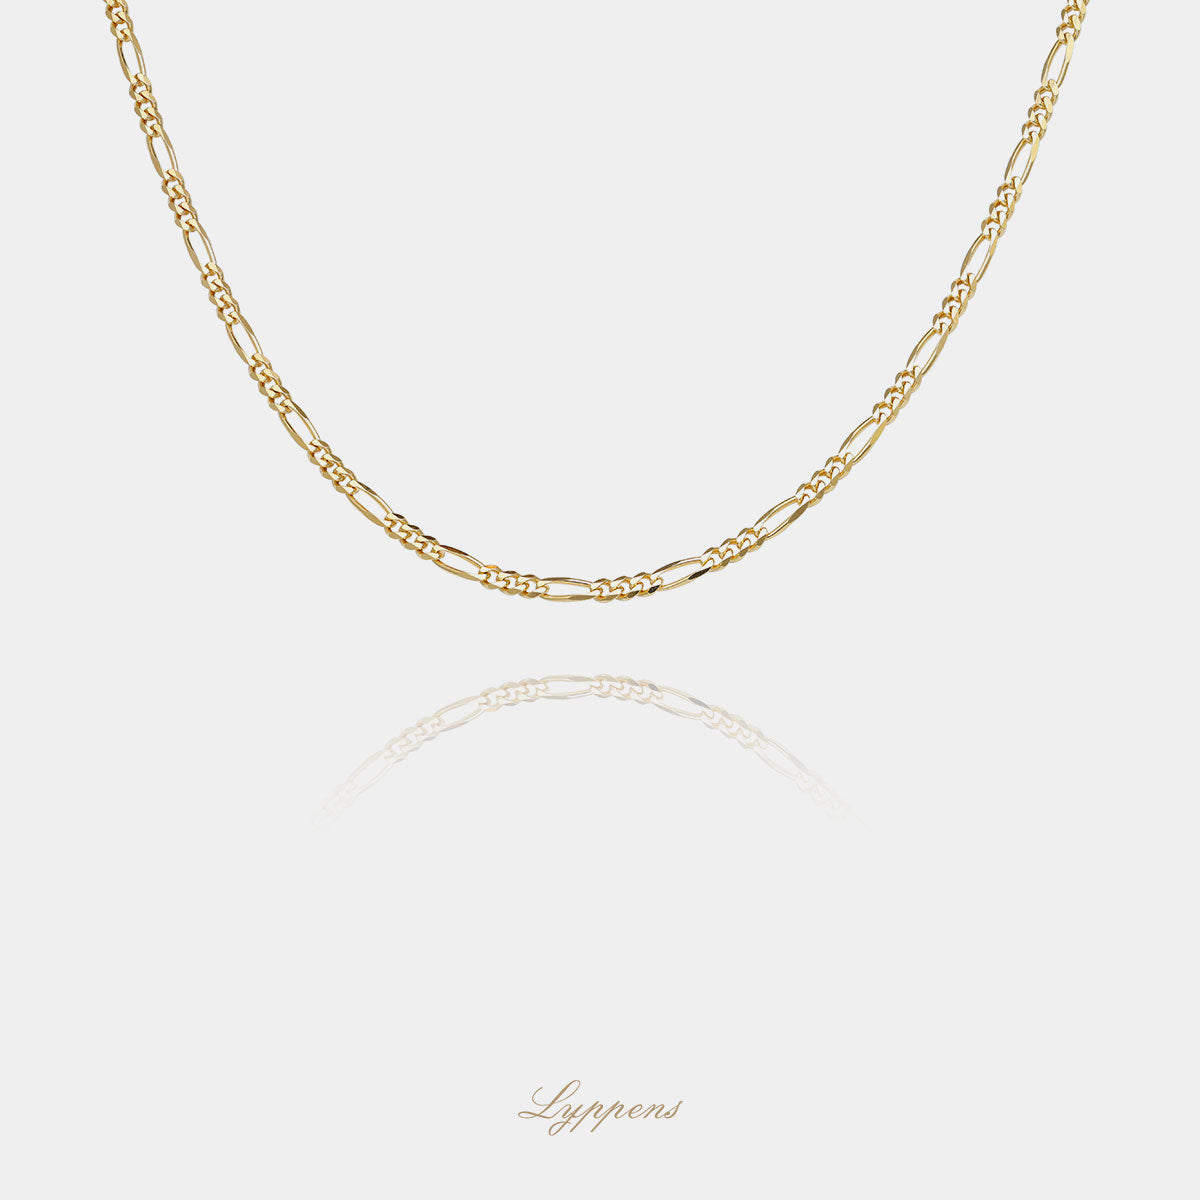 Yellow gold figaro link necklace